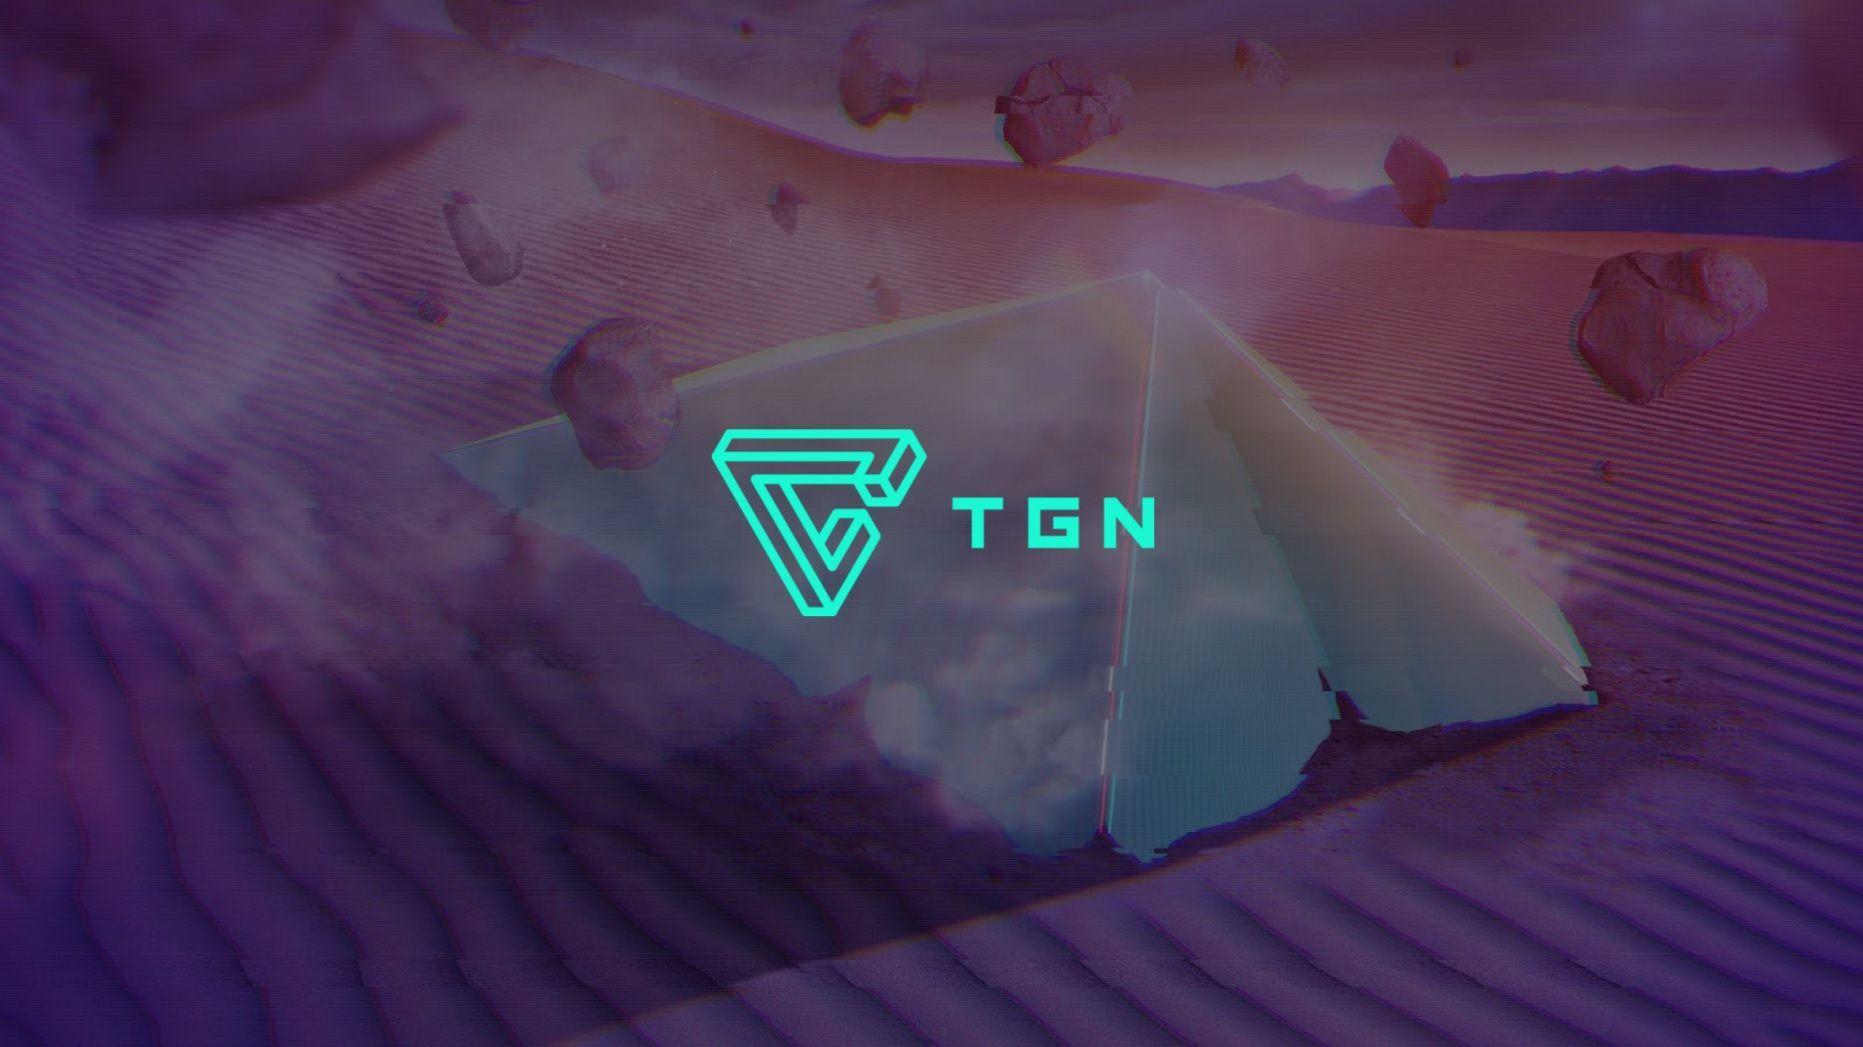 TGN Logo - Opinion on the TGN YouTube Network | hXcHector.com